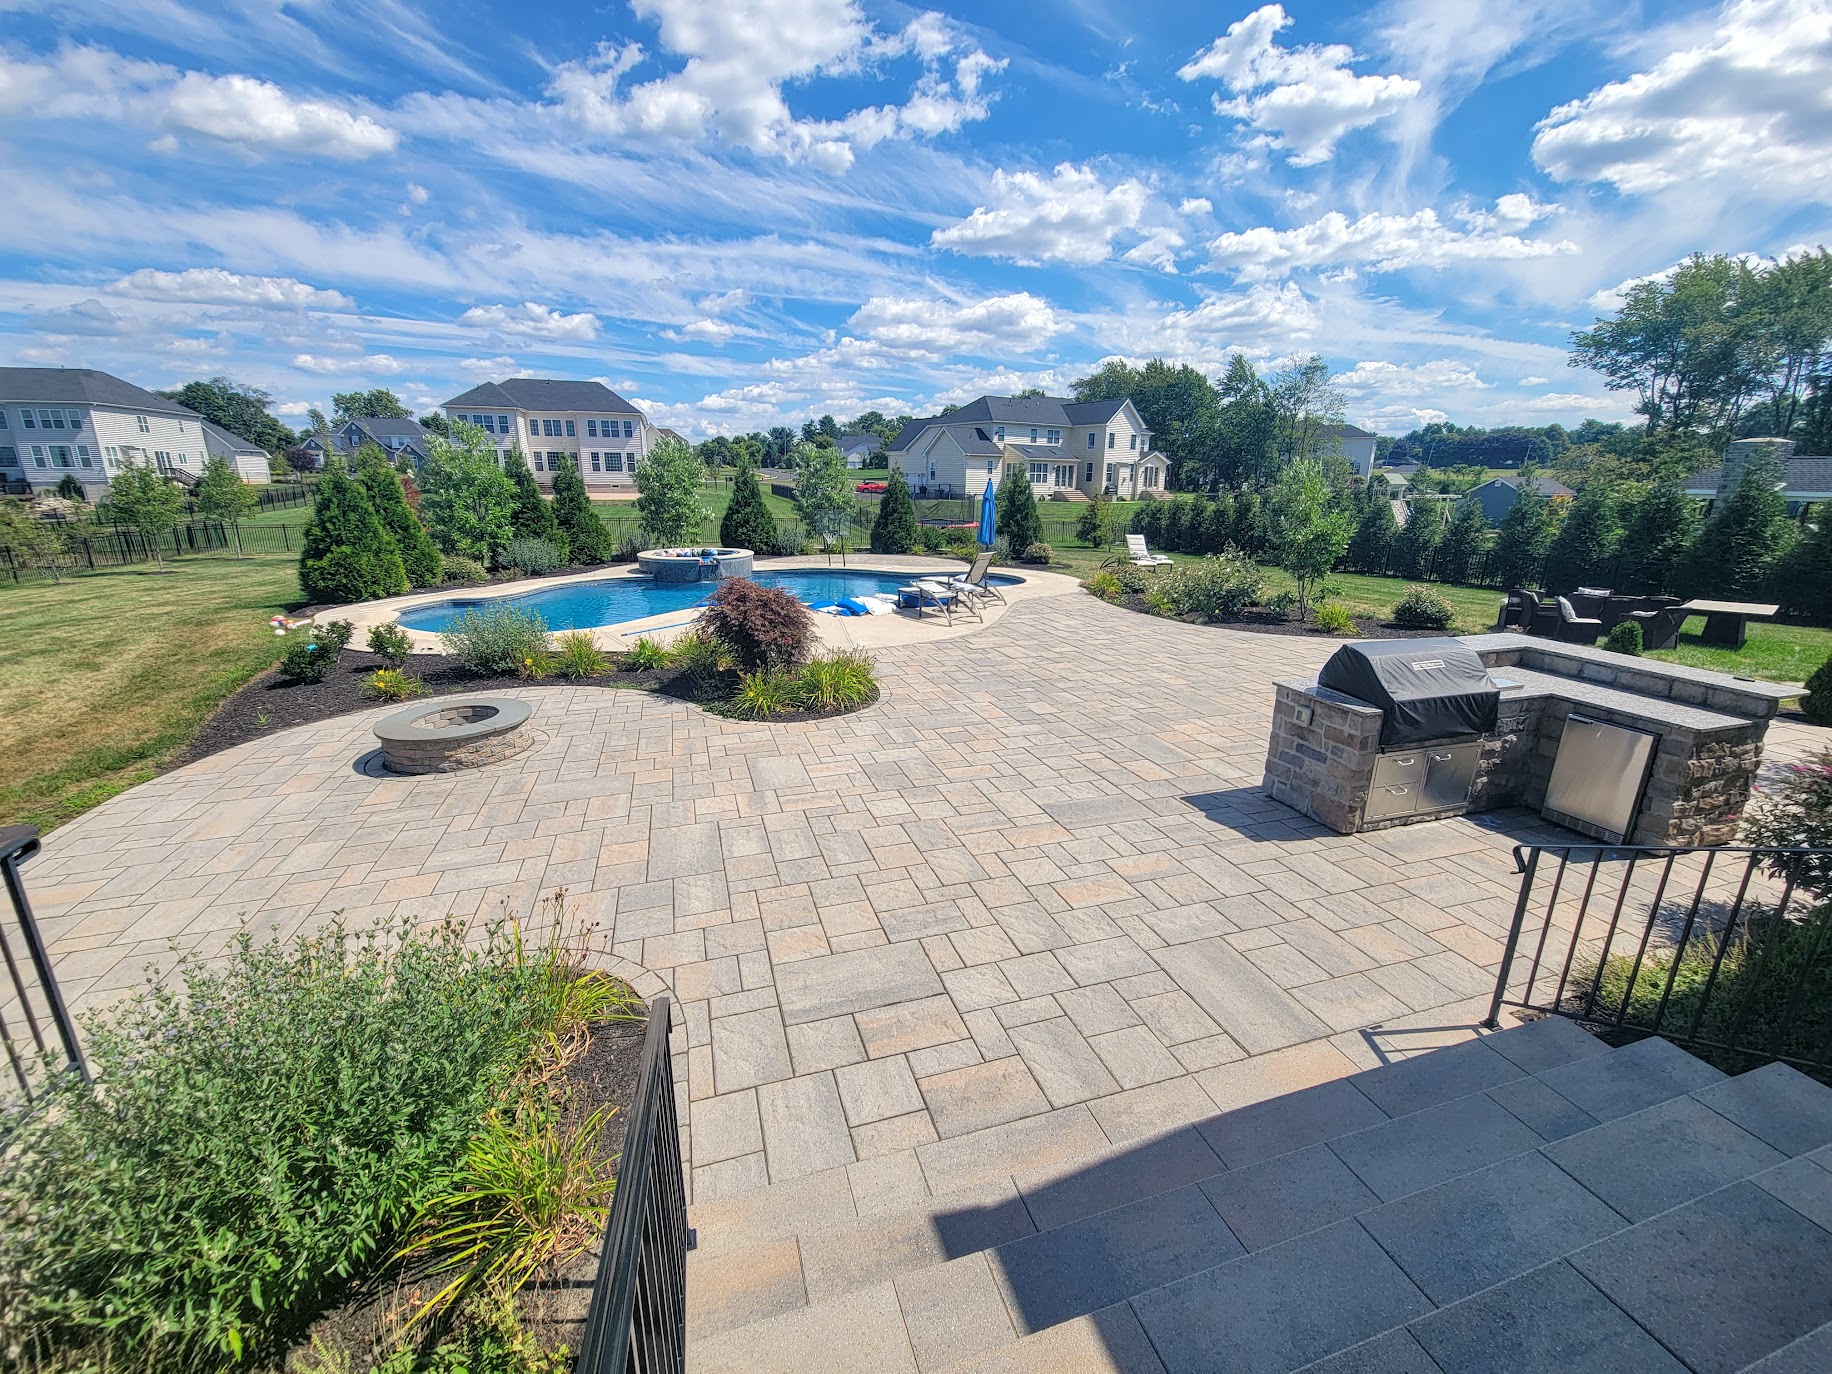 large patio area with fire pit, grill area, and pool